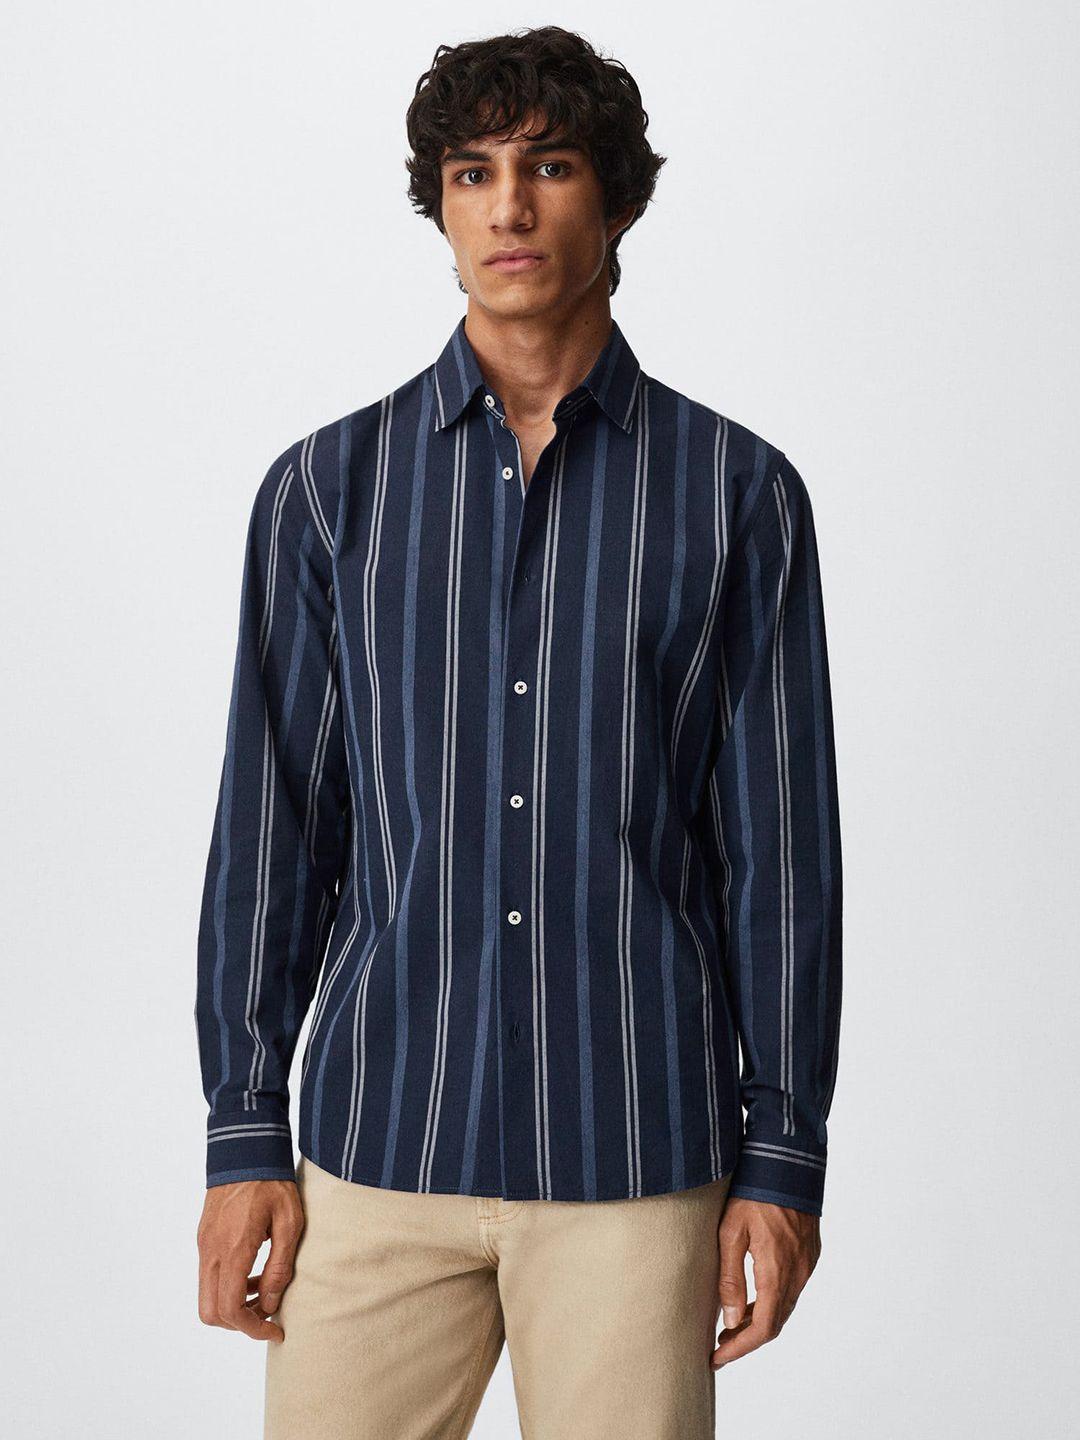 mango man navy blue & grey slim fit striped pure cotton sustainable casual shirt